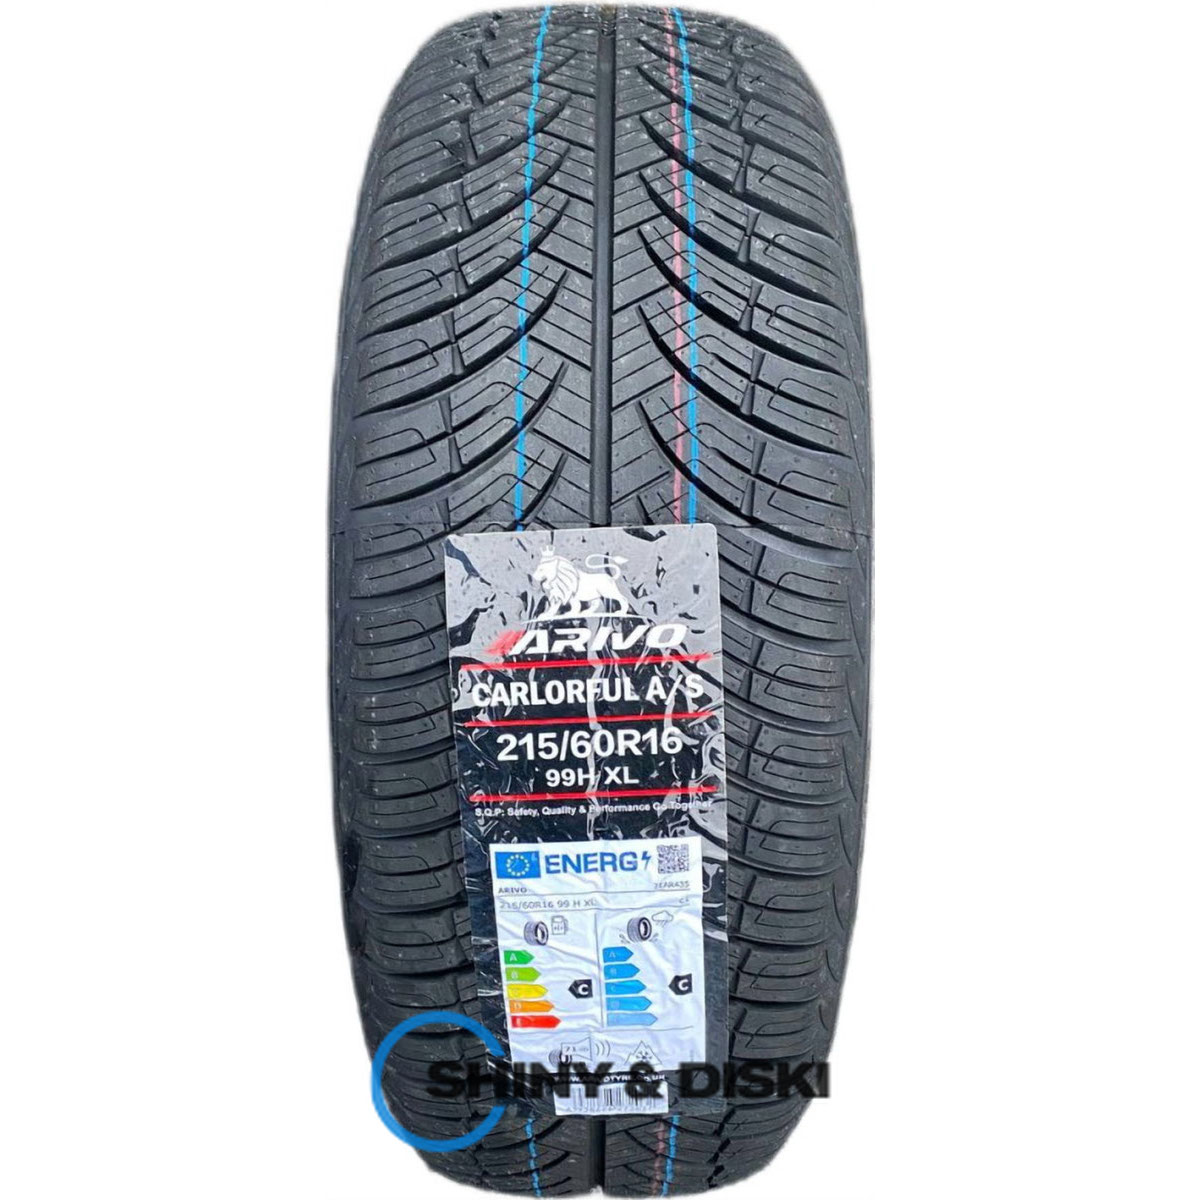 покрышки arivo carlorful a/s 195/55 r15 85h